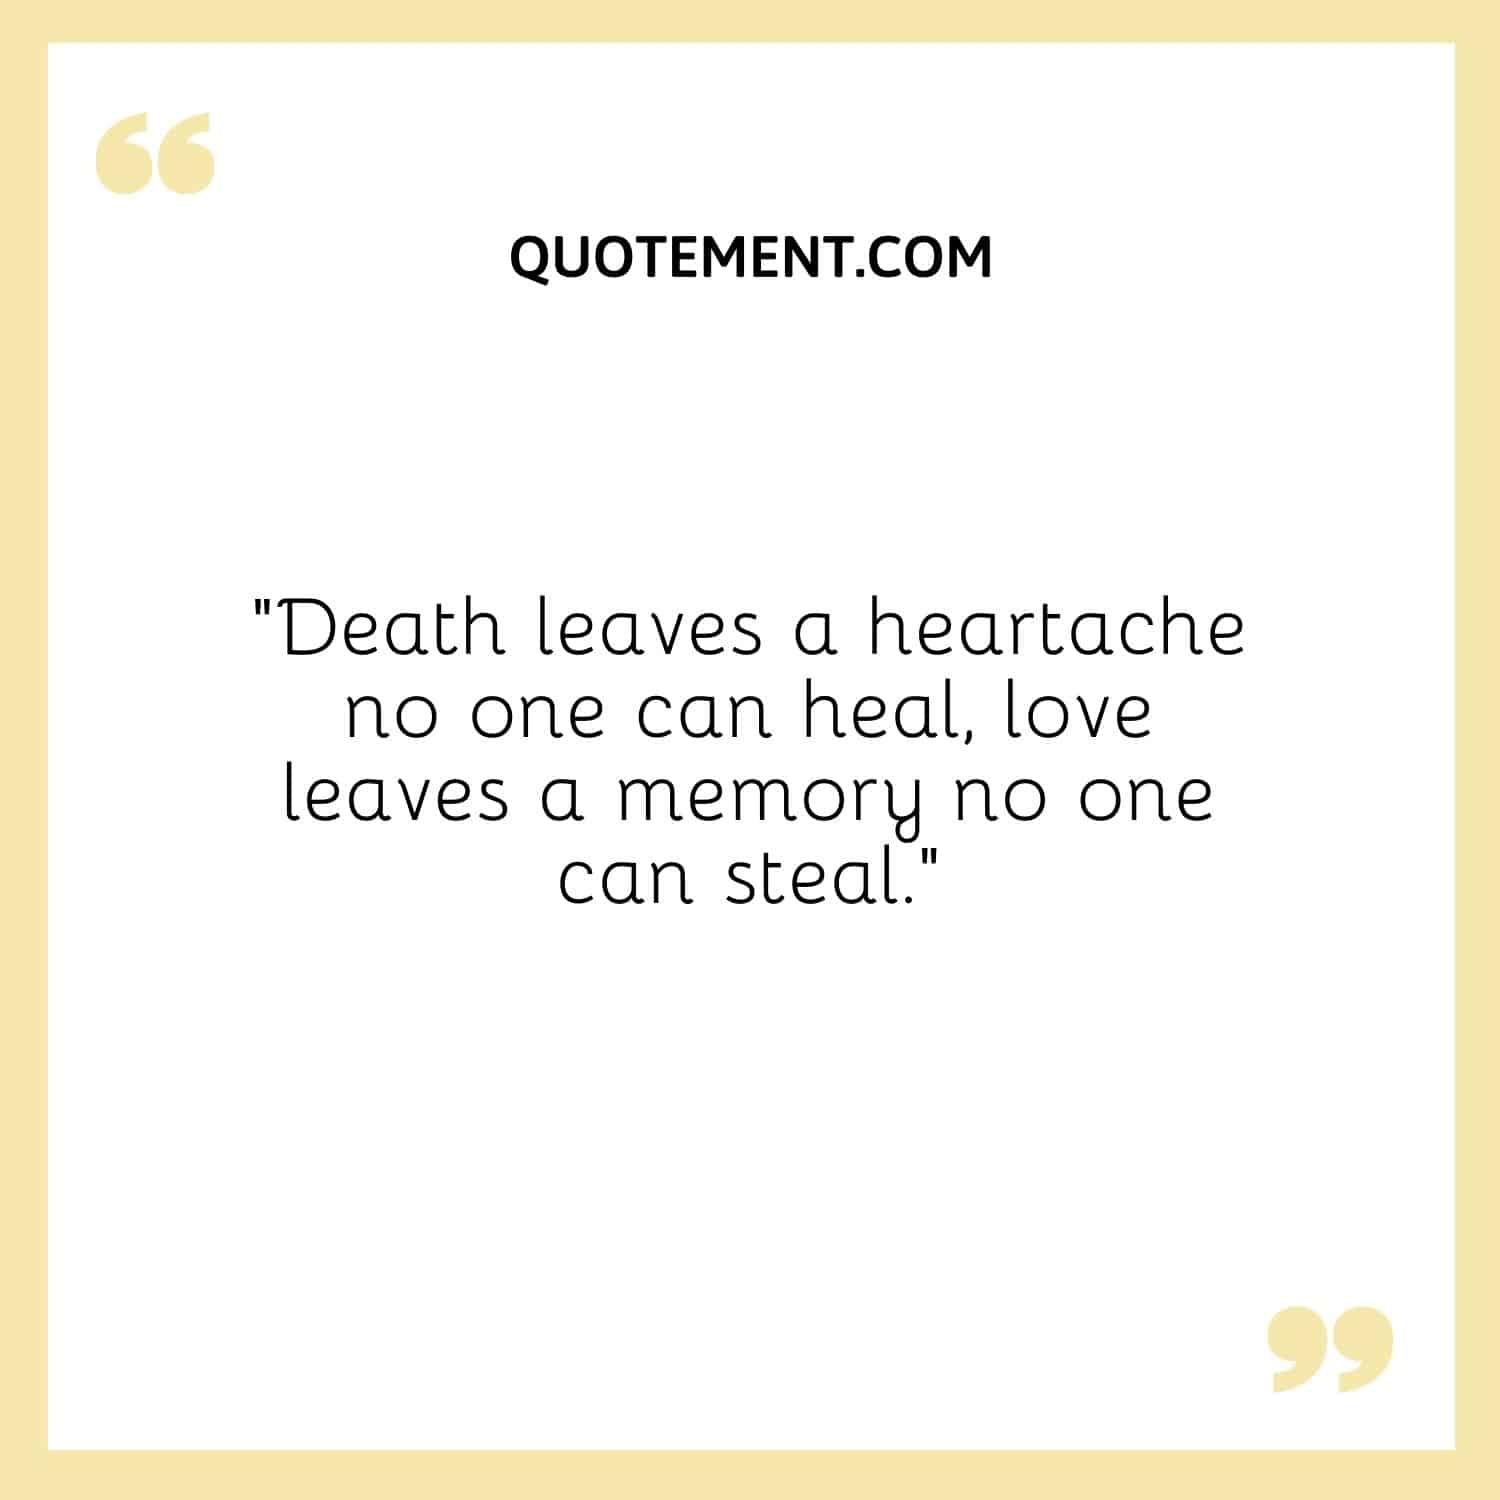 Death leaves a heartache no one can heal